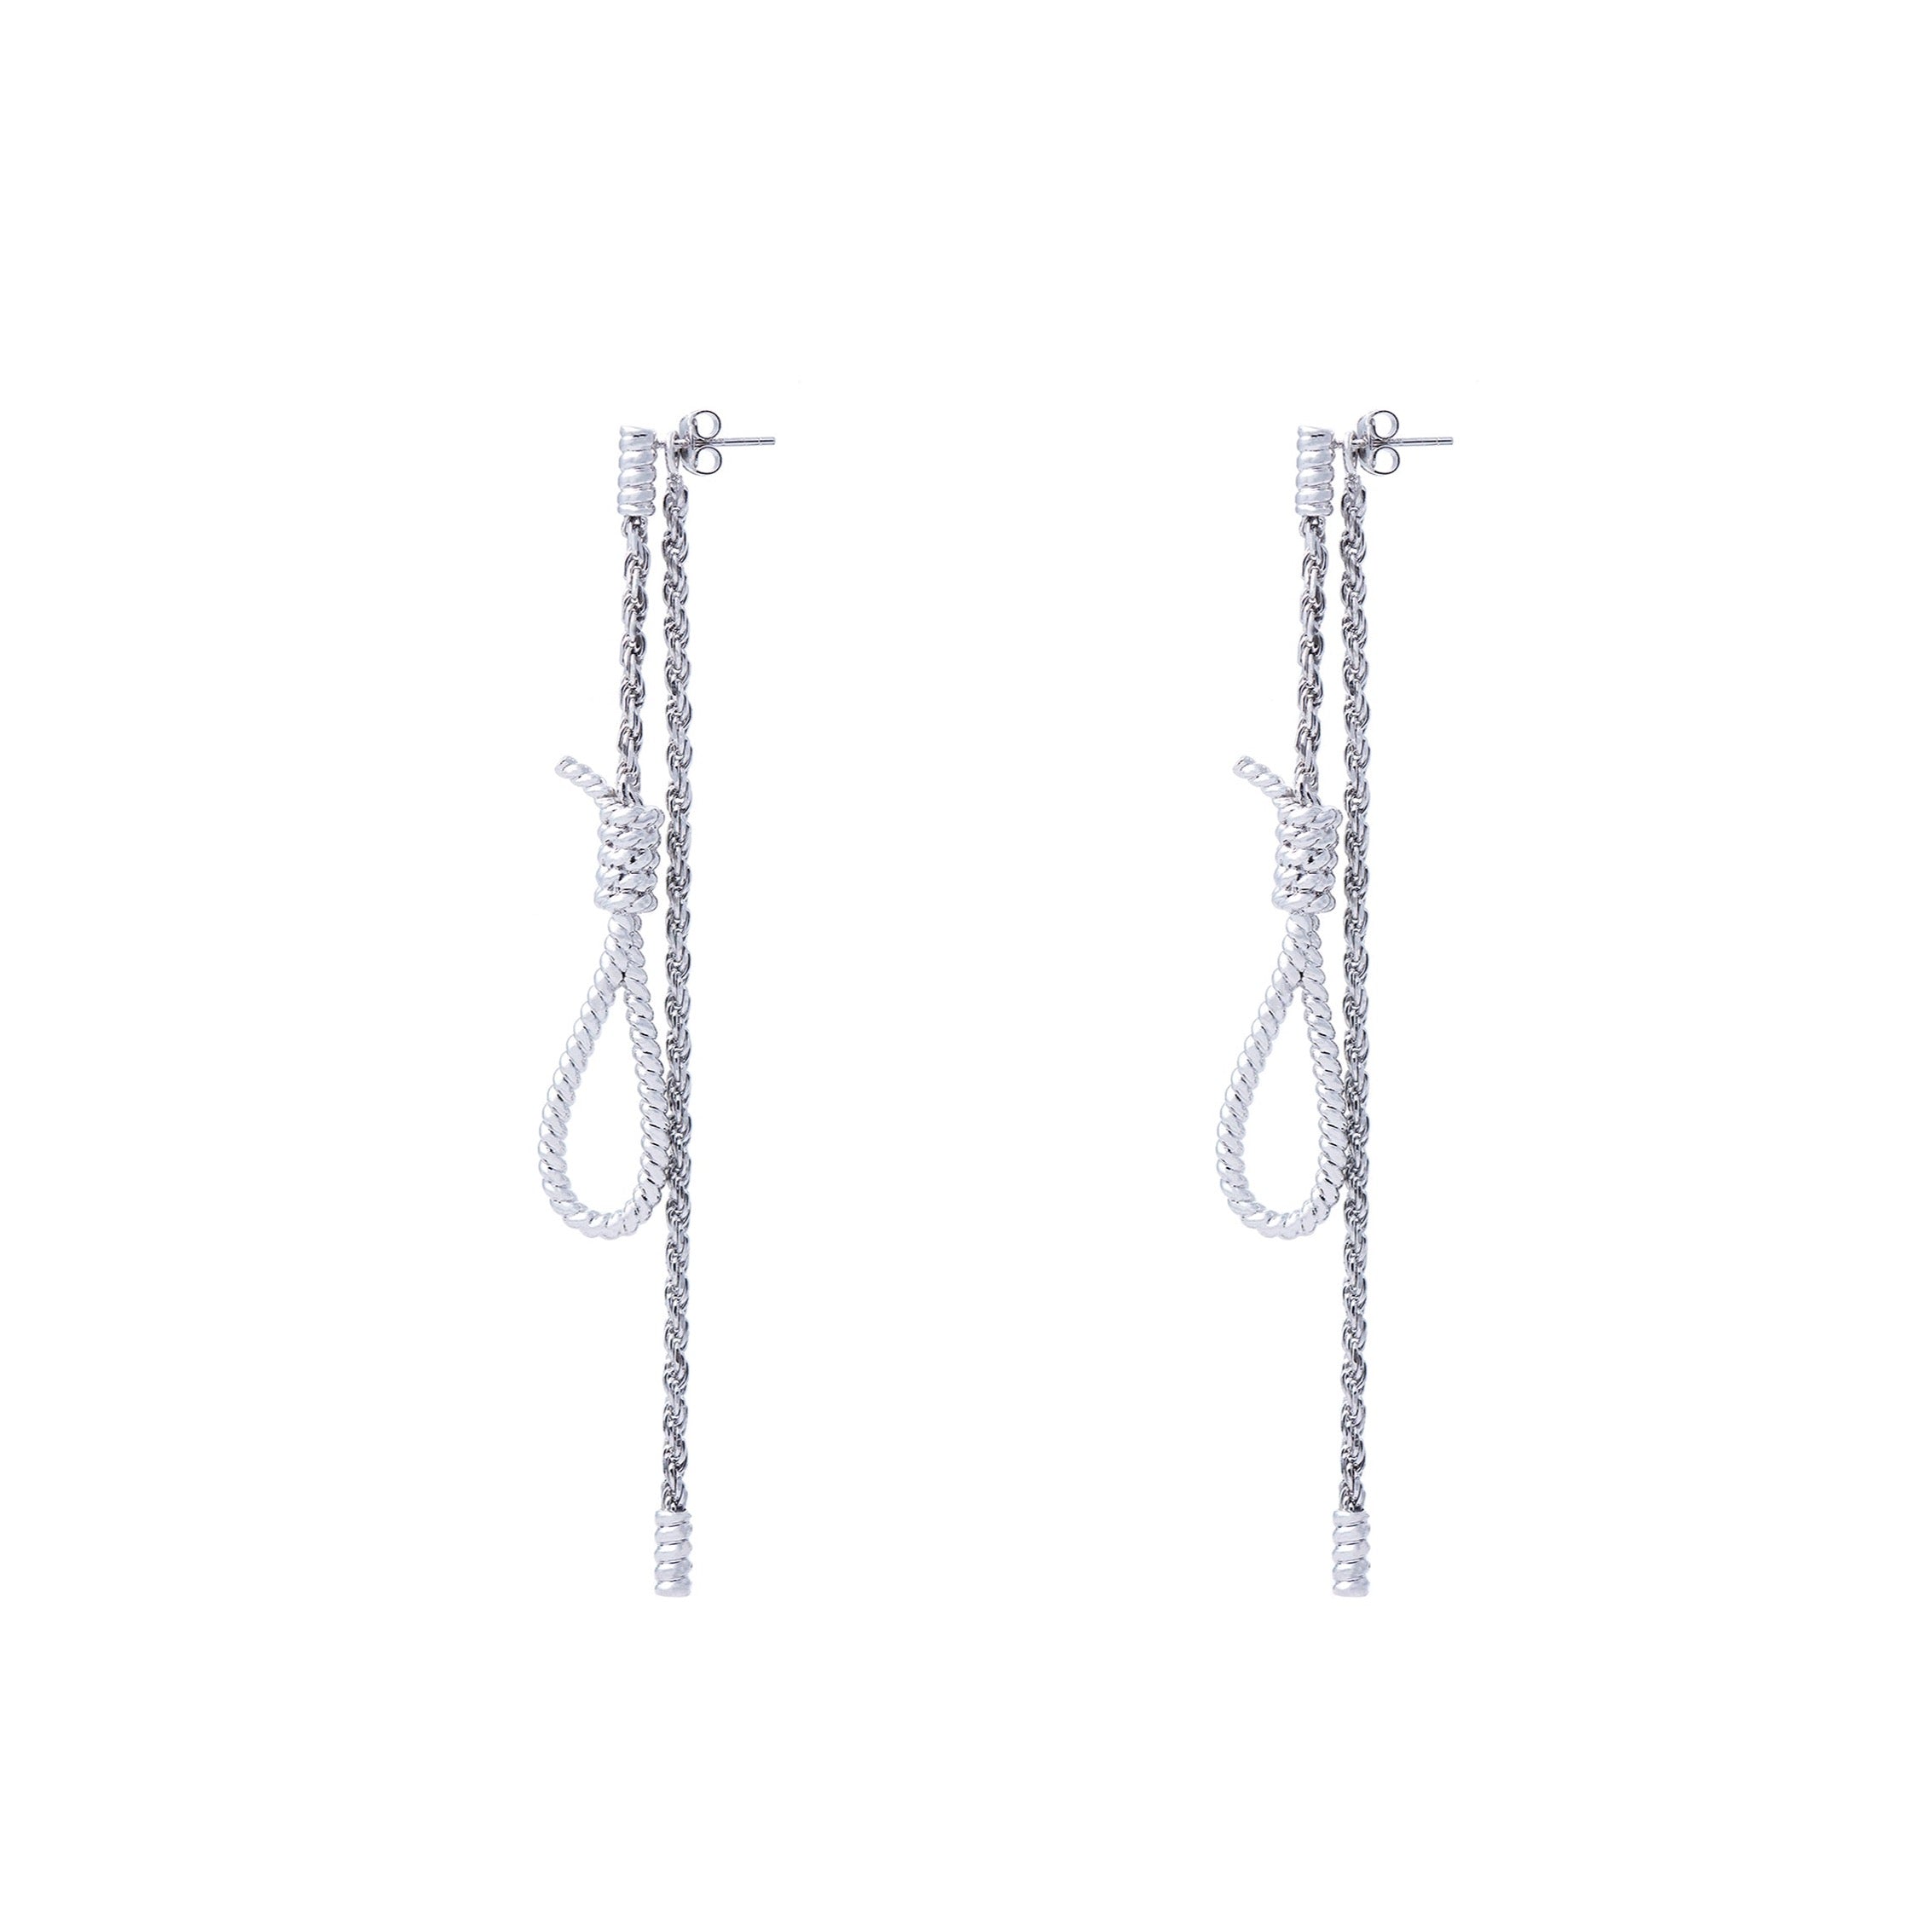 'Moments' Knotted Long Earrings - A-D-JUST - ALSOLIKE